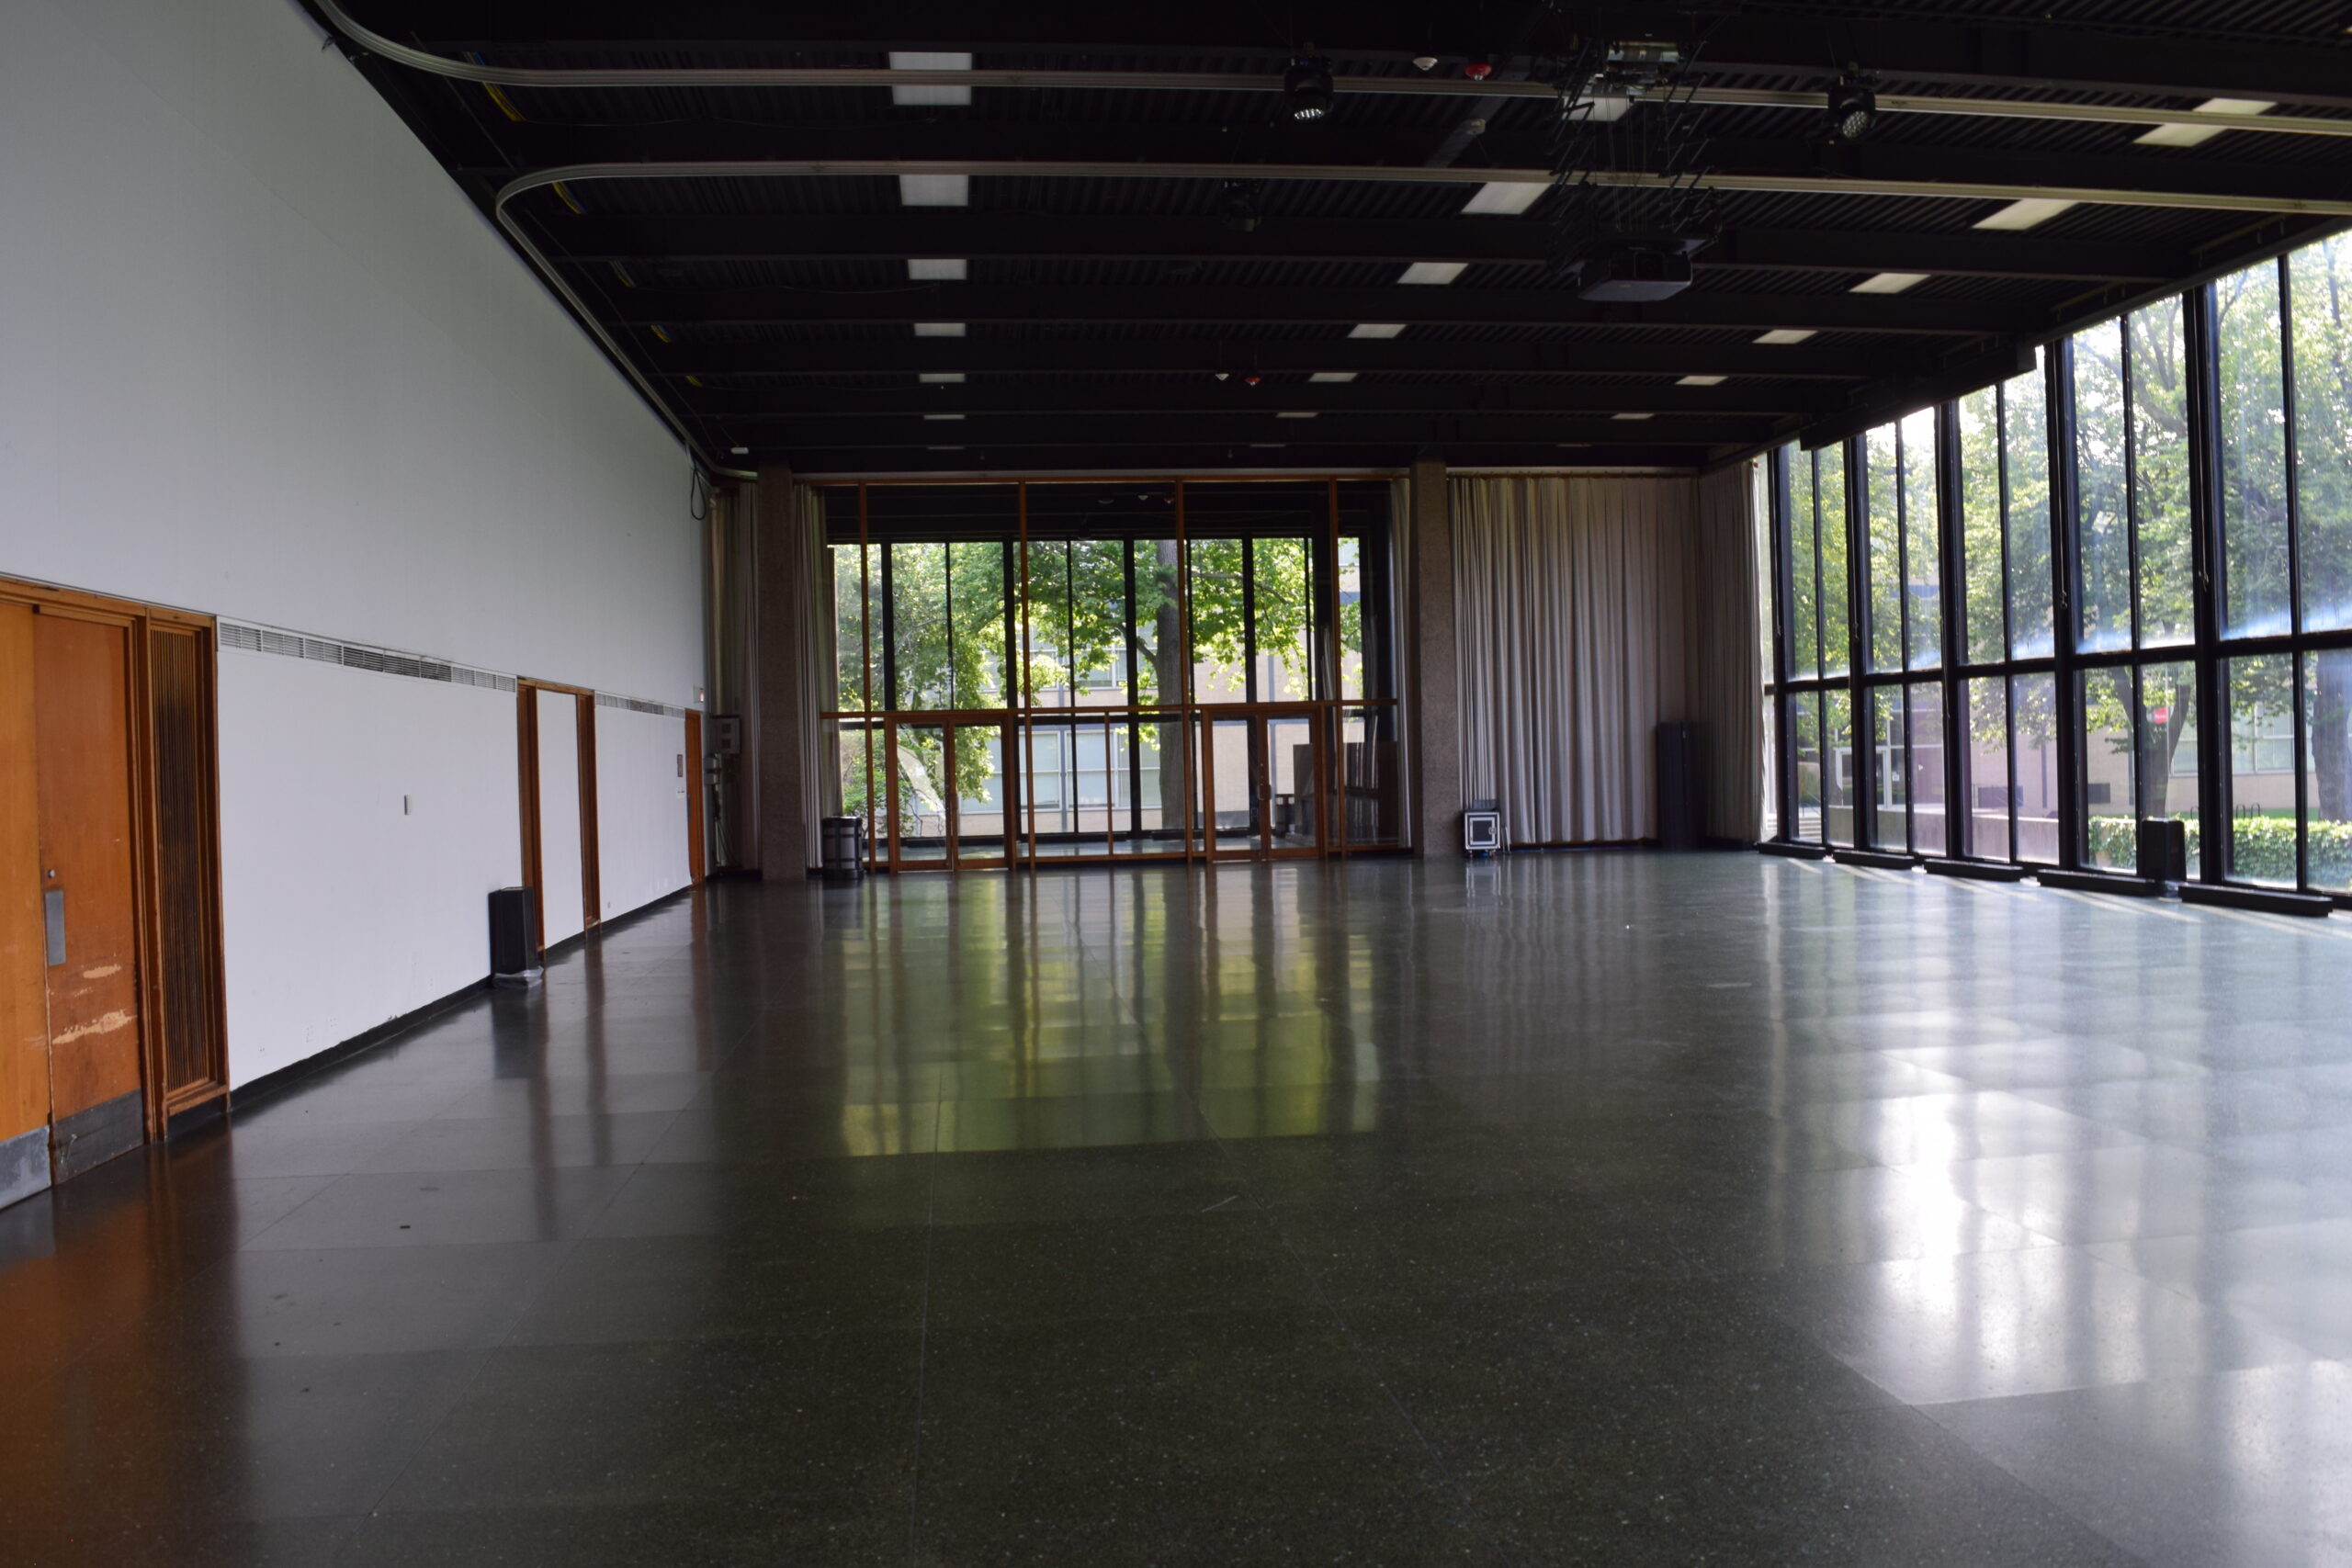 A large empty room with large windows letting in sunlight from the right side.